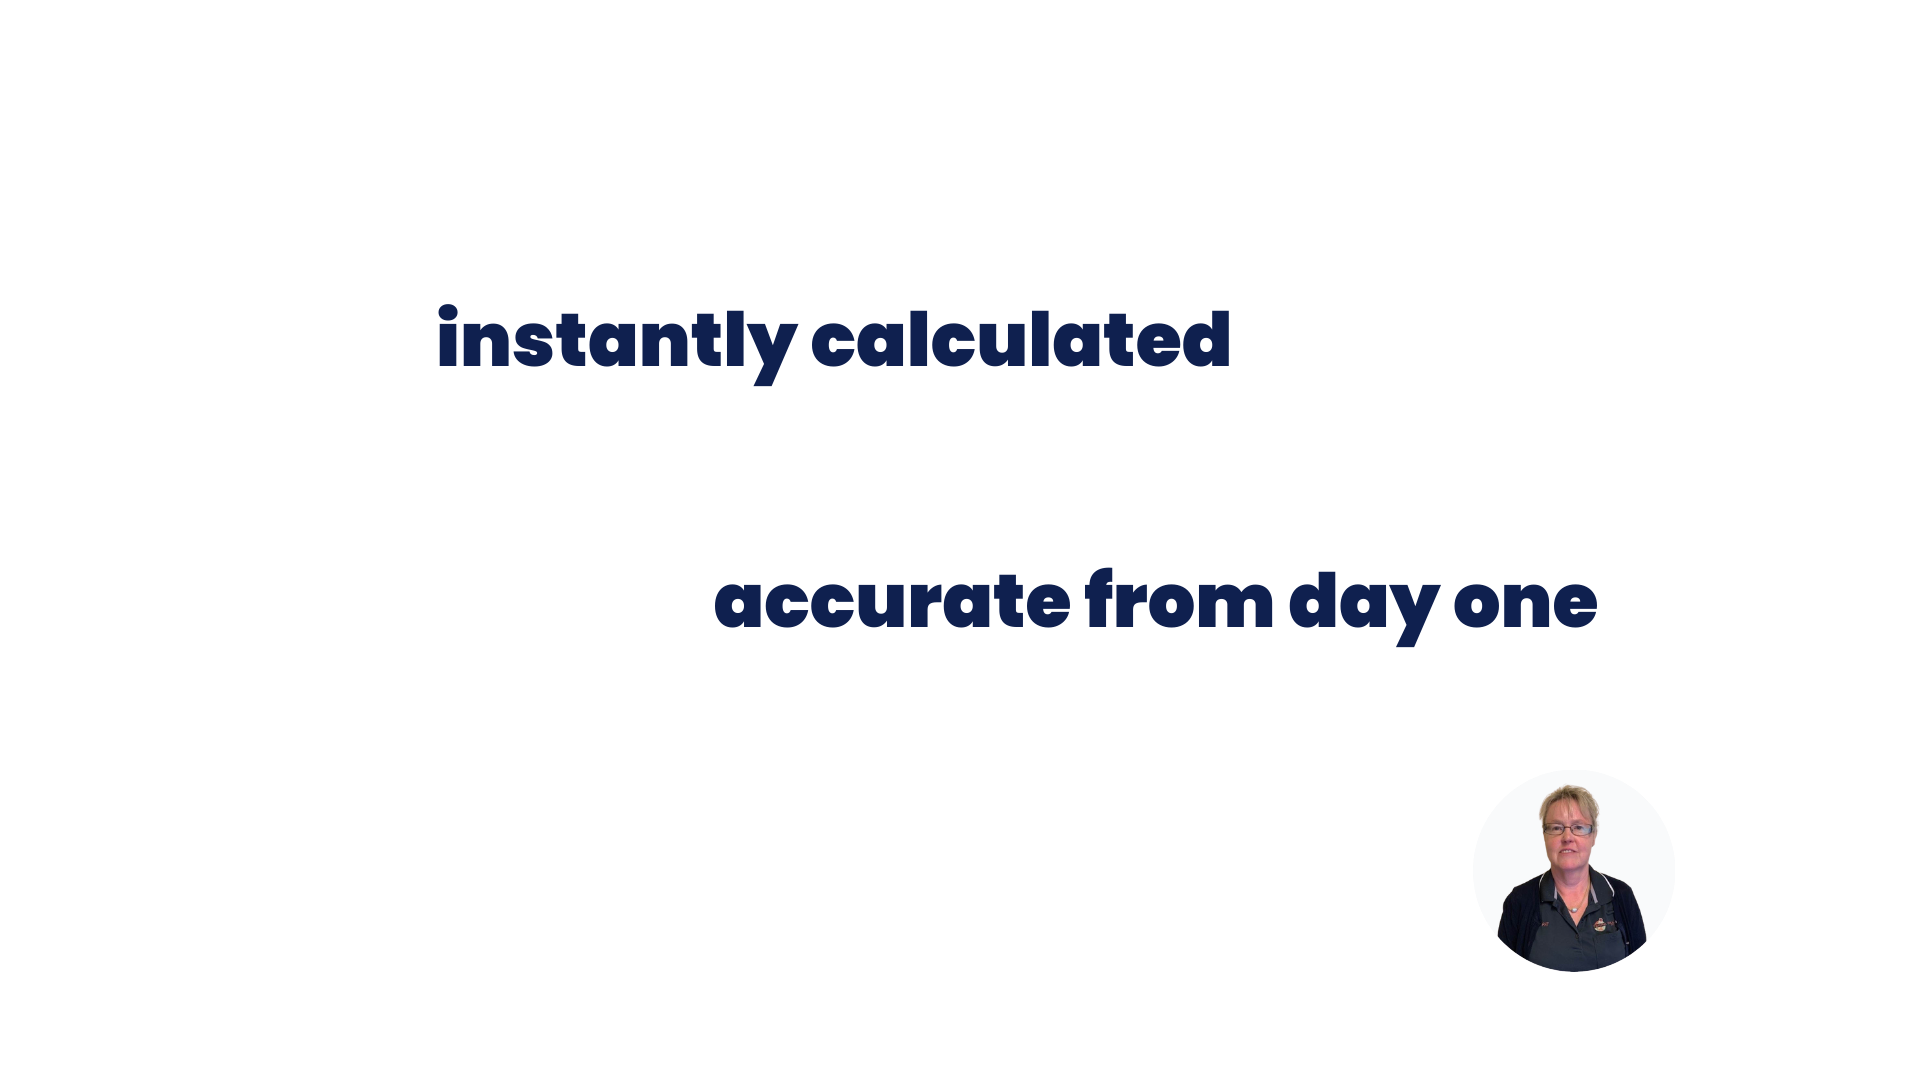 Pat Dowdall: It's great having all our charges instantly calculated against the client's cost contract. It saves us so much time knowing that the data is accurate from day one!